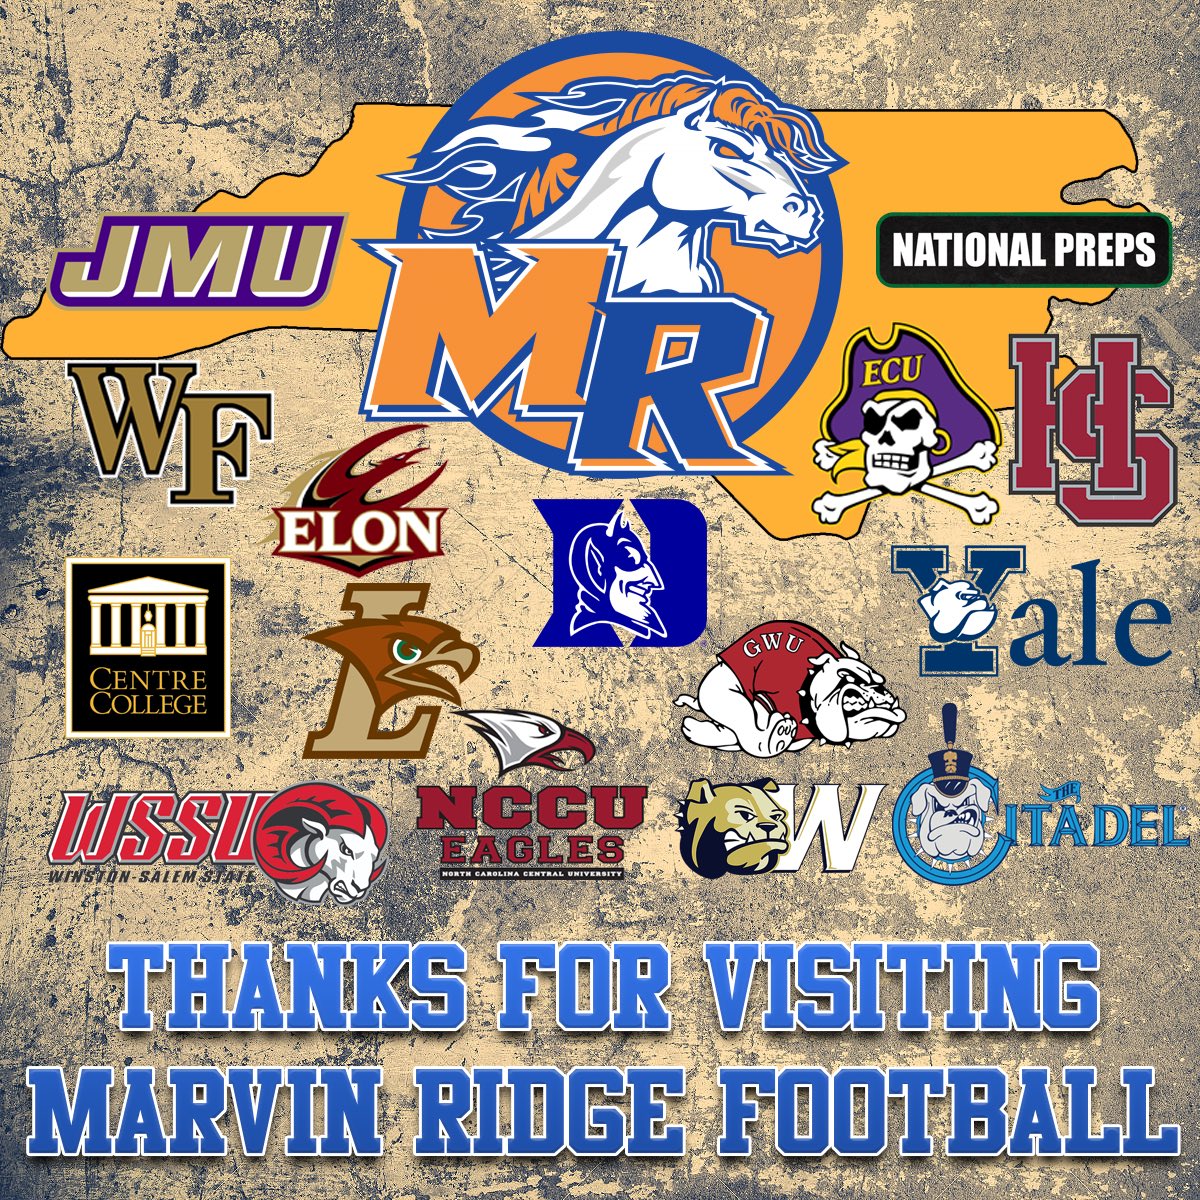 What a week it was for Maverick football🏈🏈 We had over 15 colleges come evaluate our players💪💪 We would like to give a shoutout to @NPCoachJeff for coming to out to Prospect Day👏🏻👏🏻👏🏻